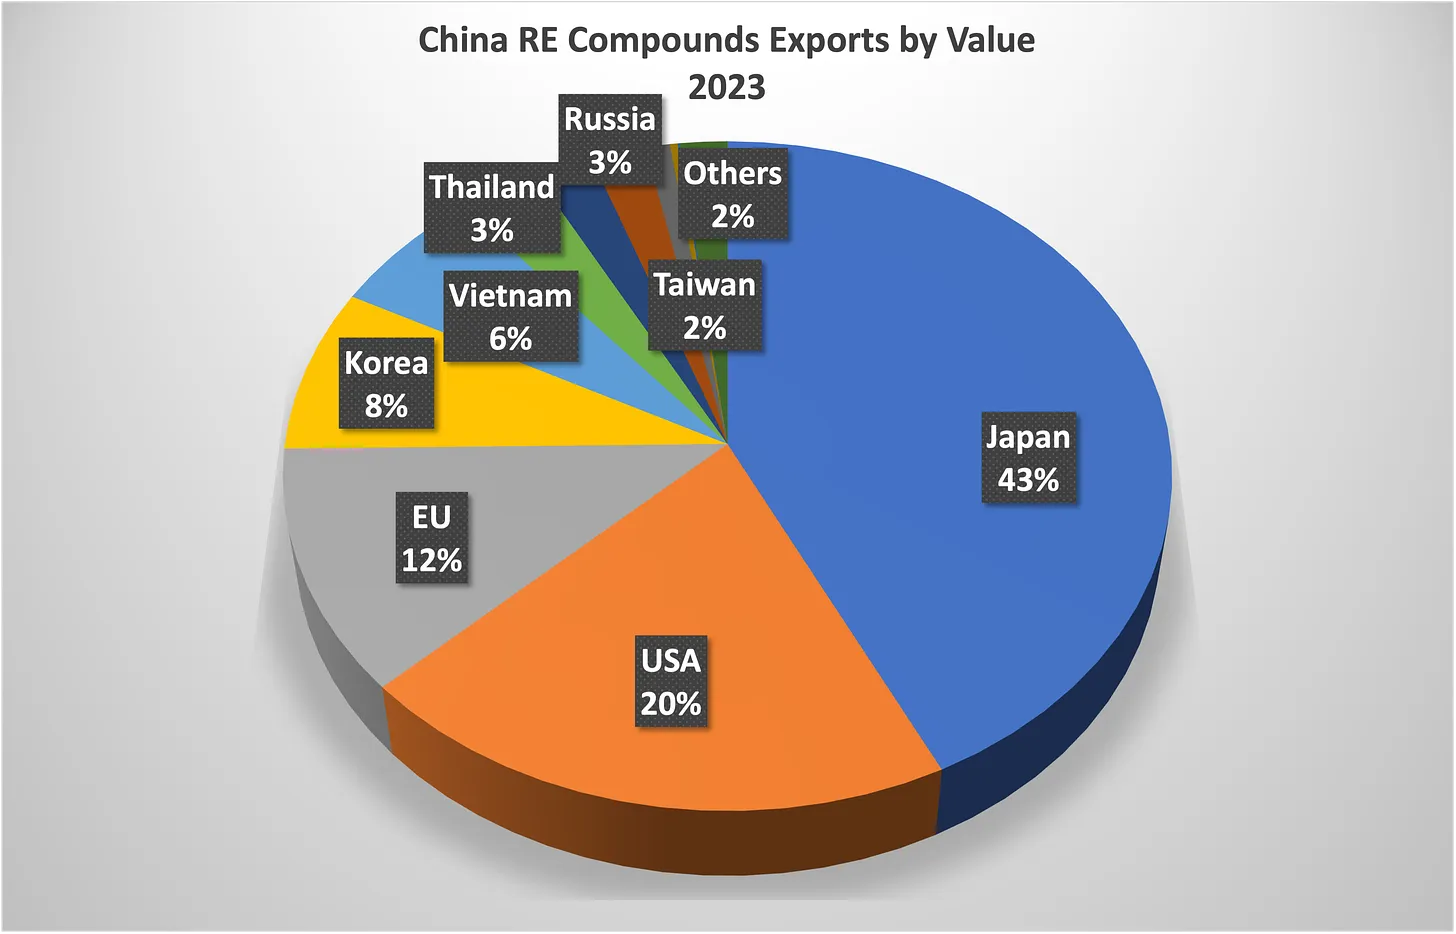 2023 RE Exports by Value